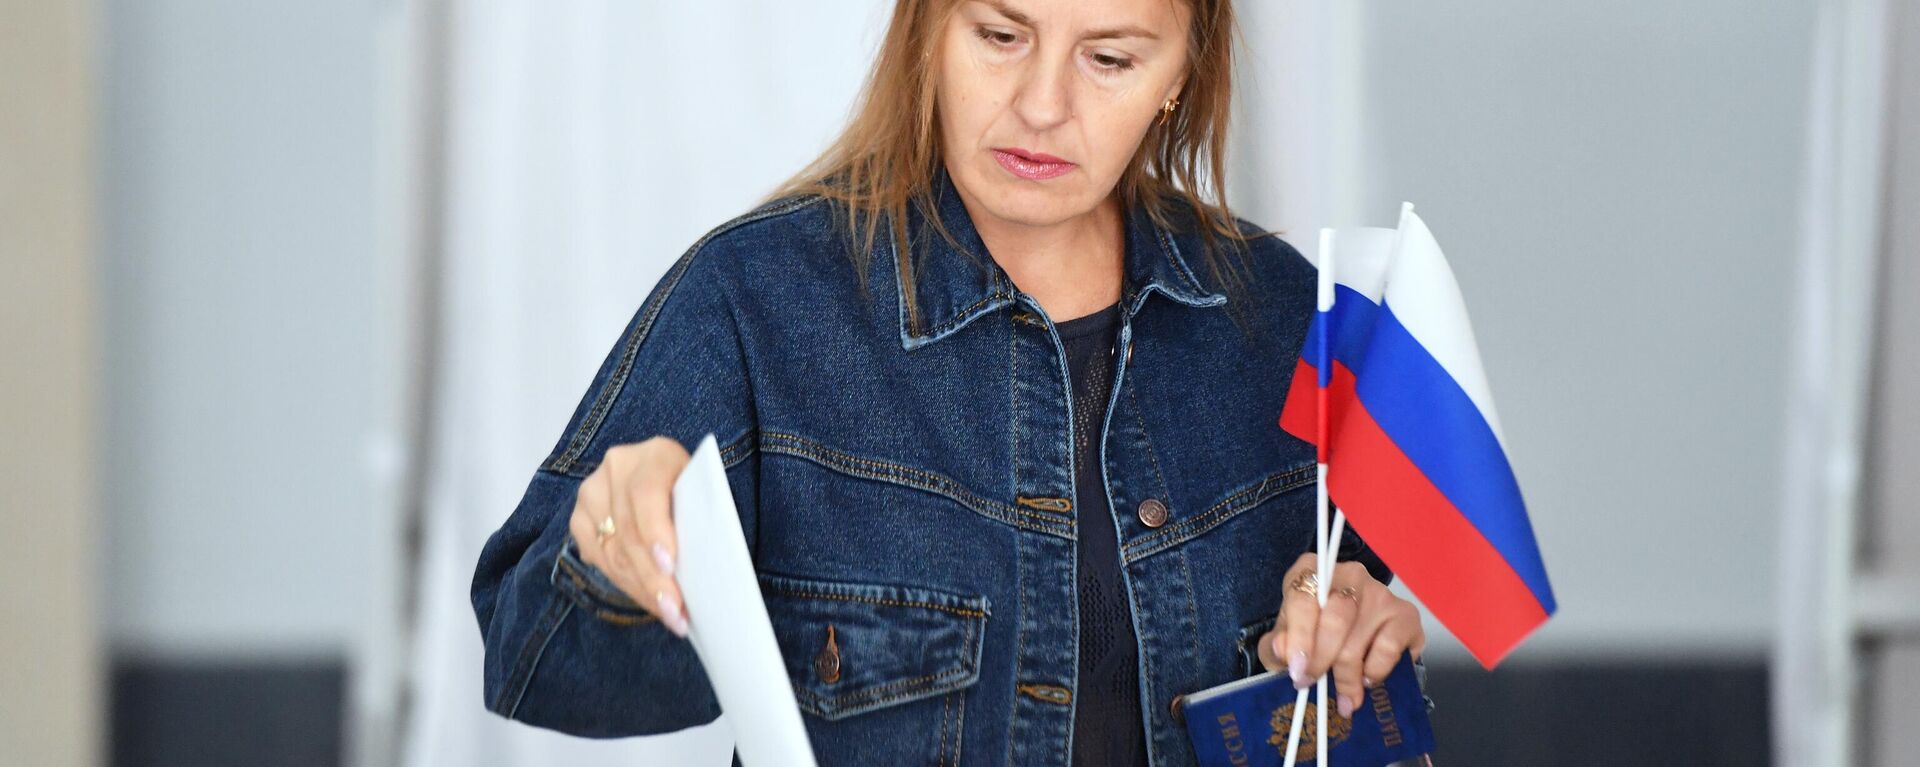 A woman casts her ballot during the referendum on the joining of Donetsk and Lugansk People's Republic and Zaporozhye and Kherson regions of Ukraine to Russia, at the polling station in Melitopol, Zaporozhye region - Sputnik International, 1920, 04.10.2022